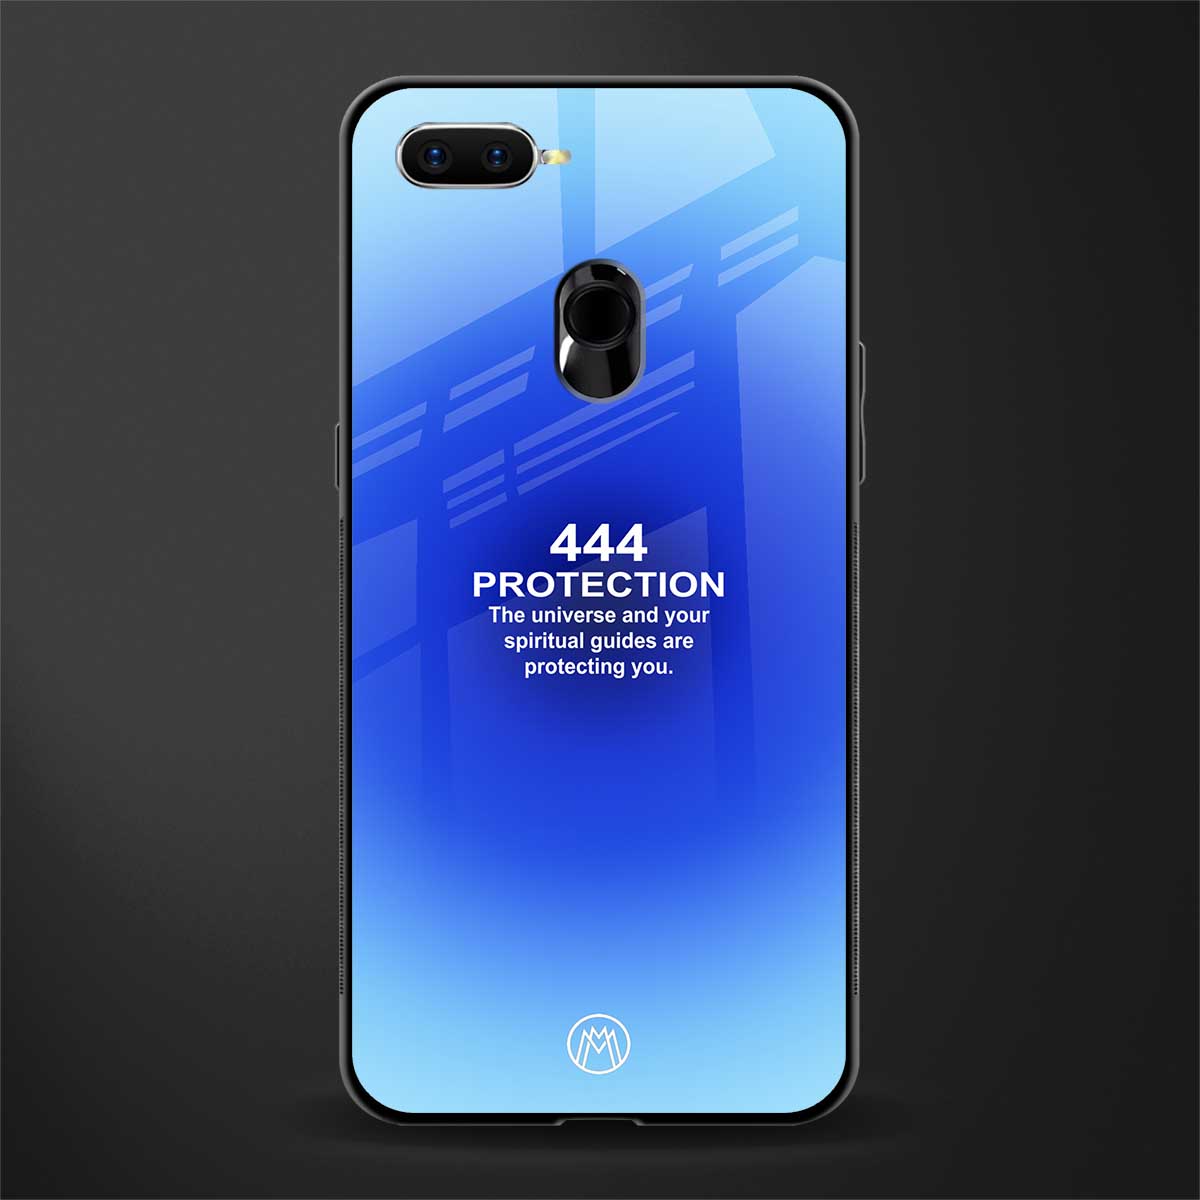 444 protection glass case for realme 2 pro image